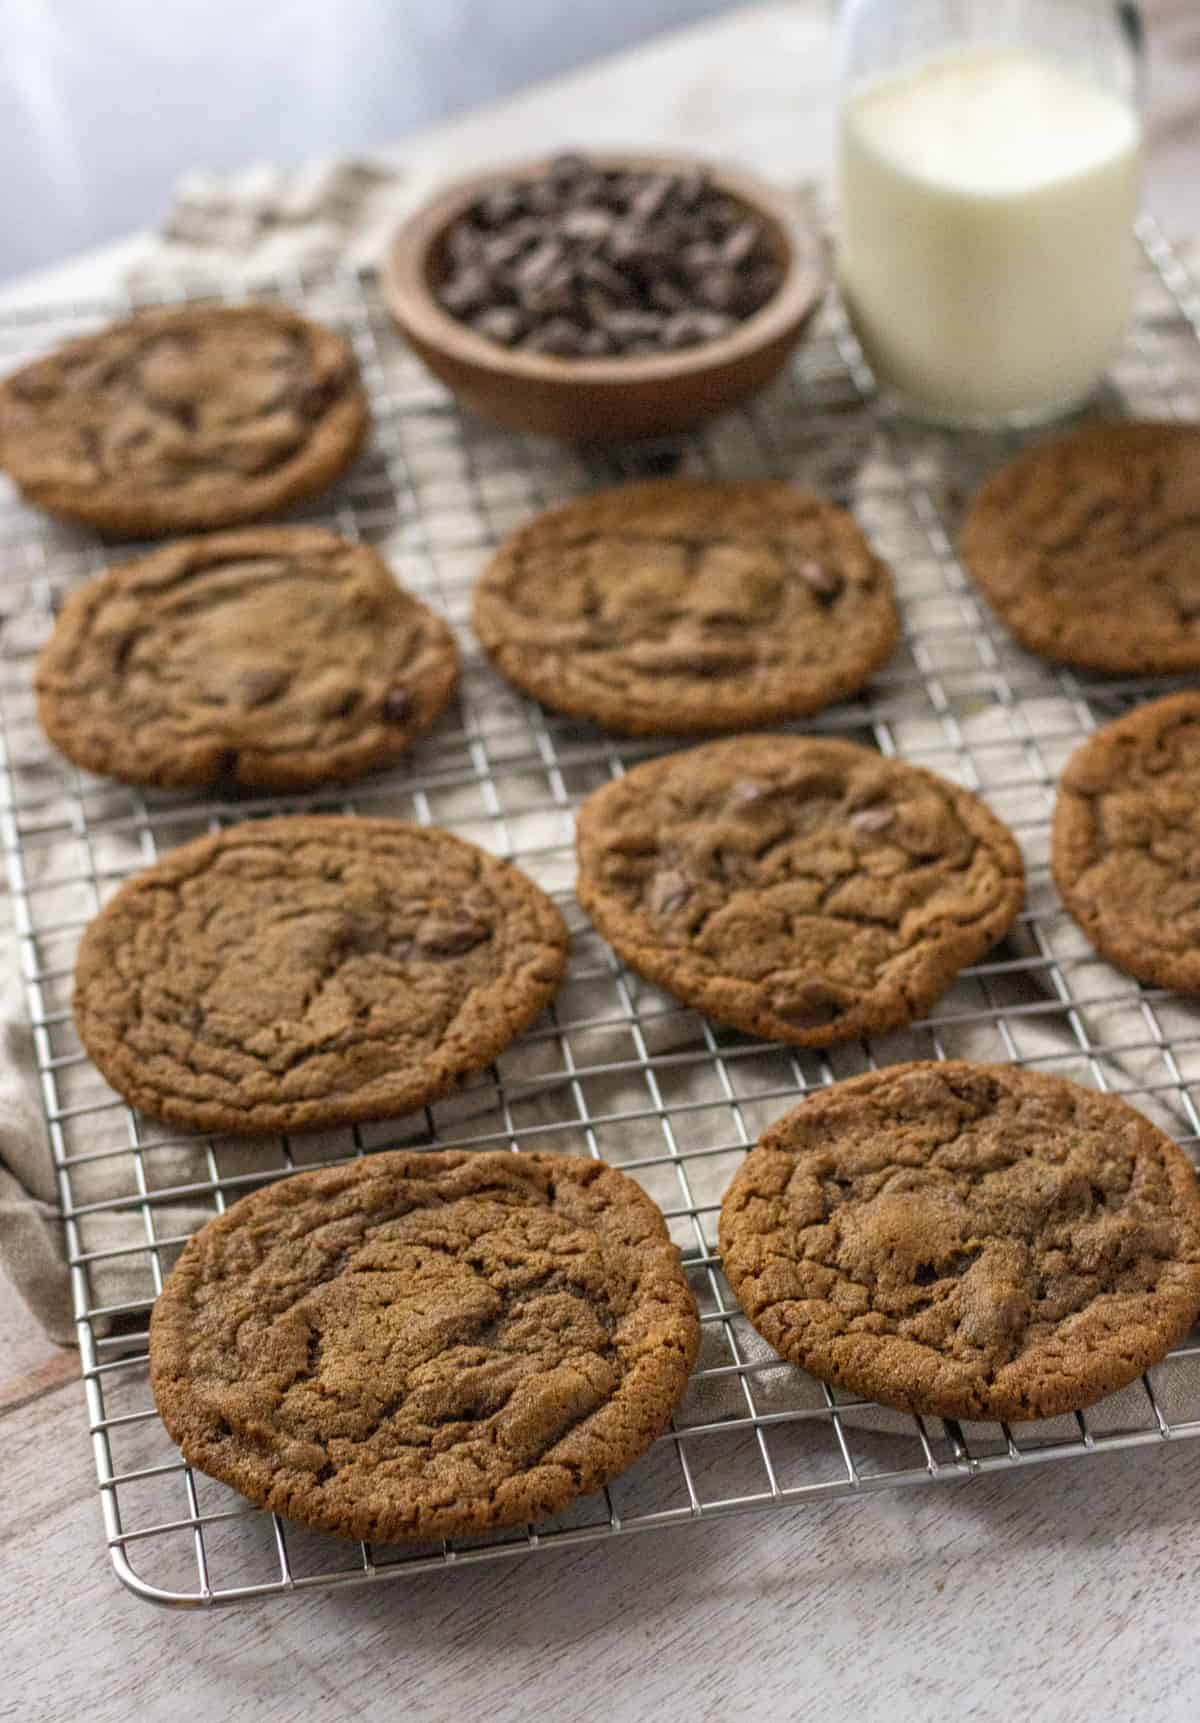 Coffee cookies on a wire rack with a bowl of chocolate chips and glass of milk.